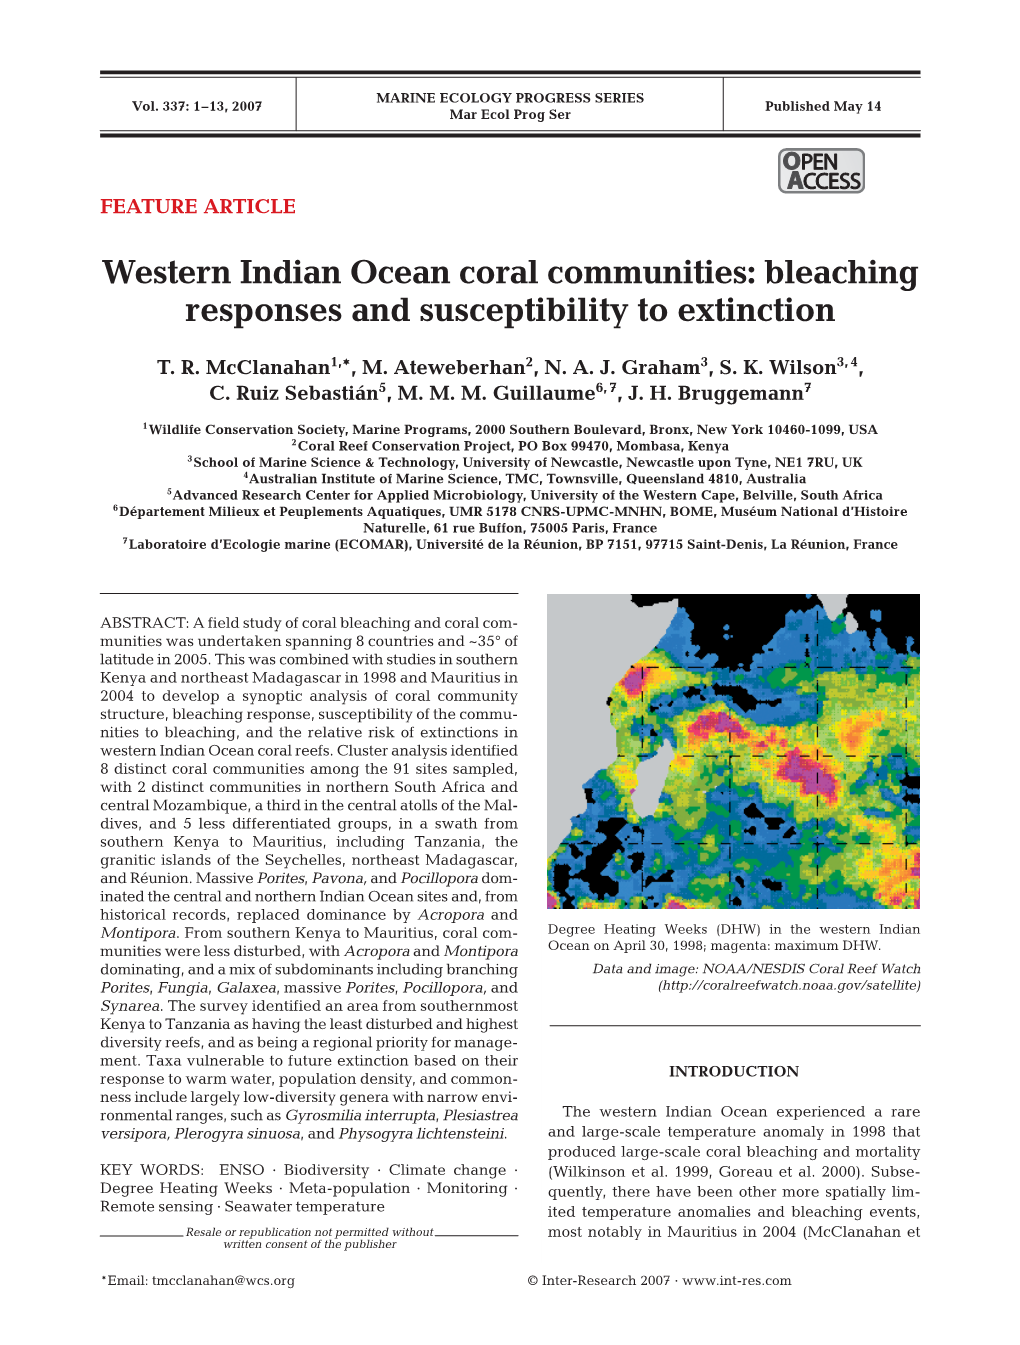 Western Indian Ocean Coral Communities: Bleaching Responses and Susceptibility to Extinction